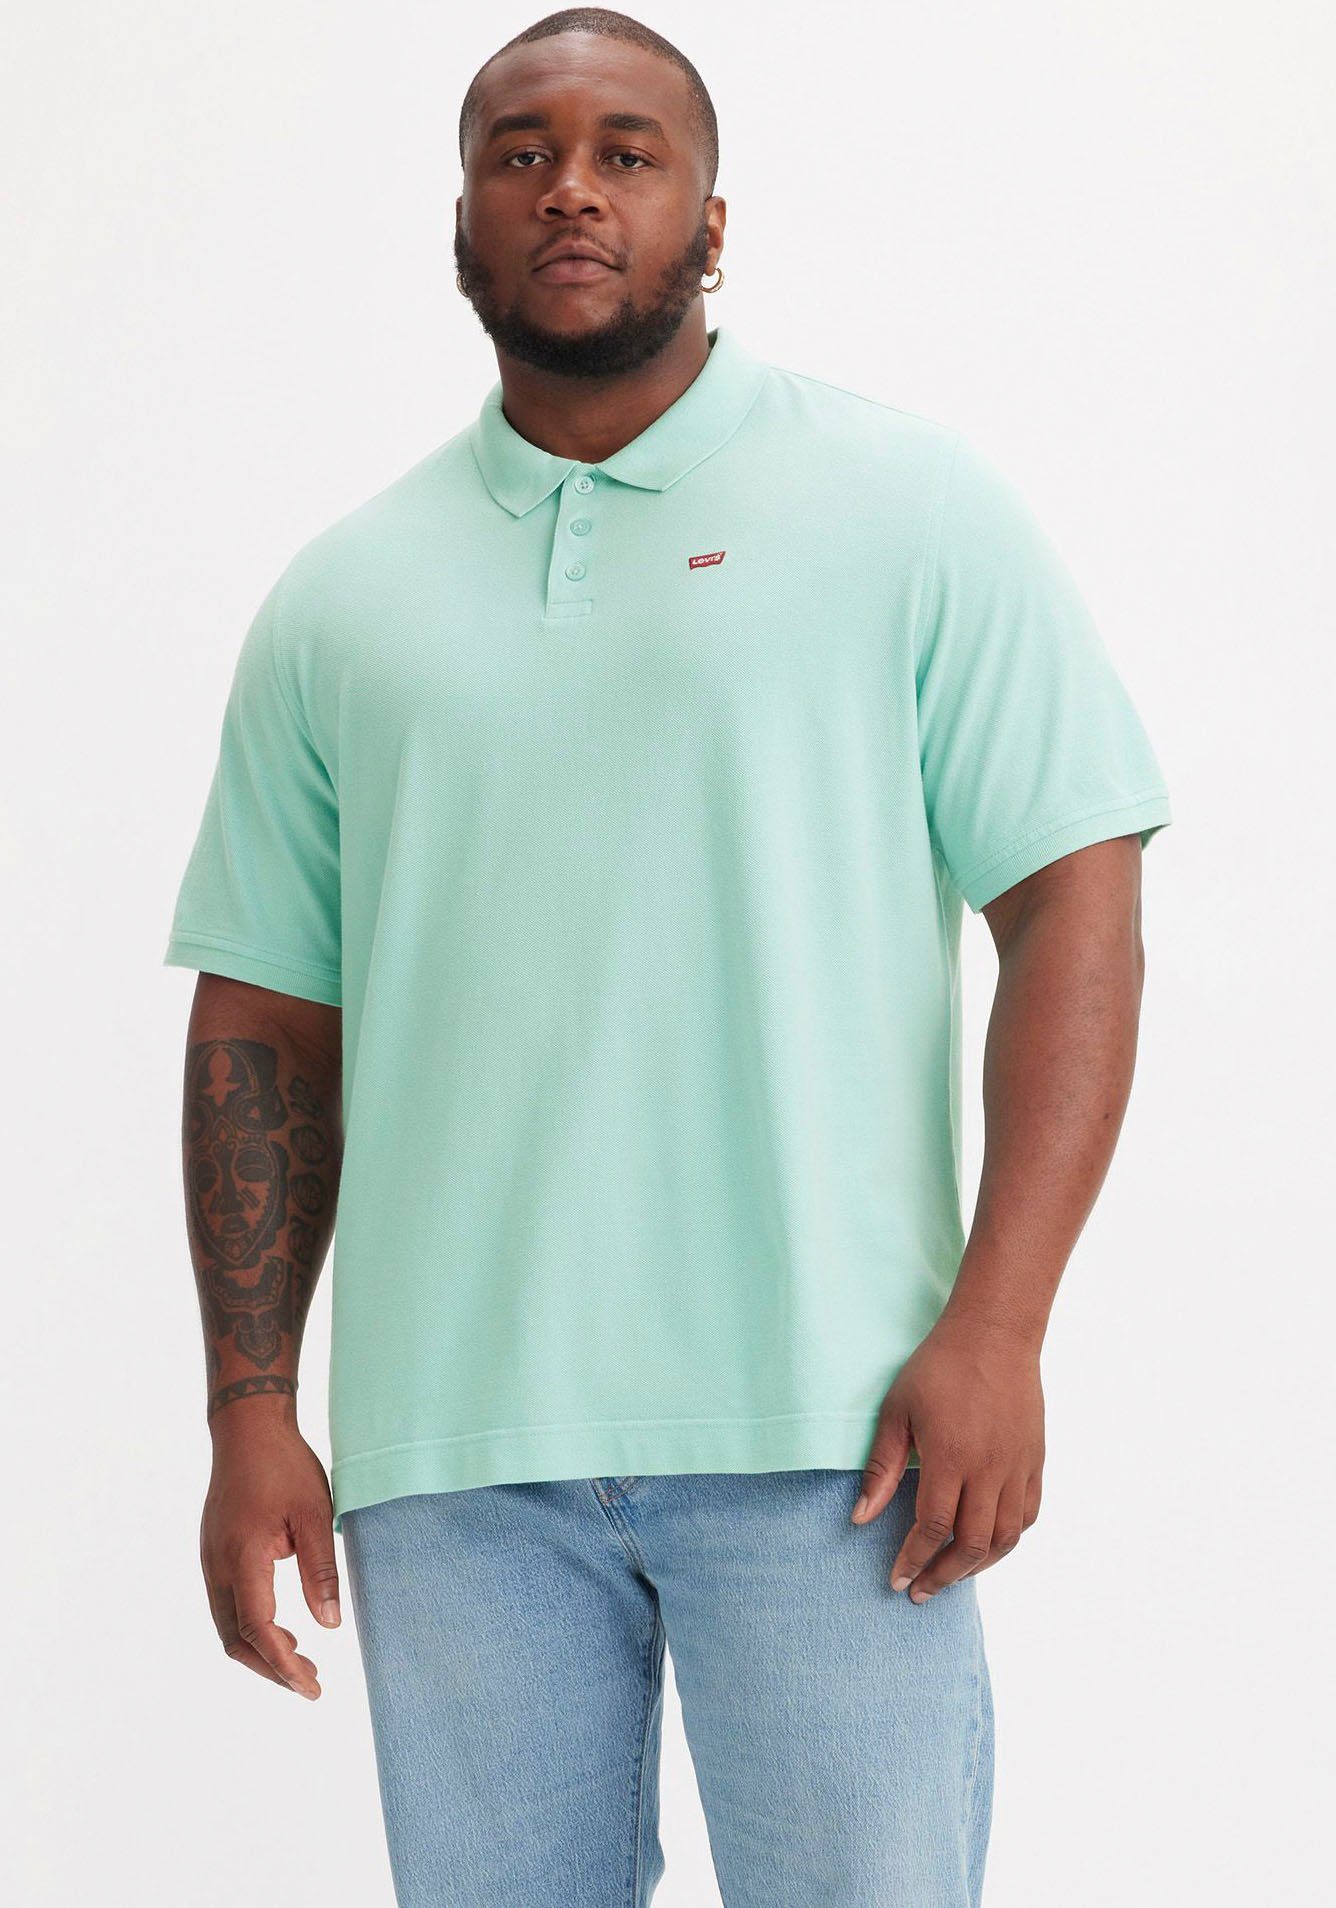 Levi's Big and Tall polo Plus Size met logo pastel turquoise